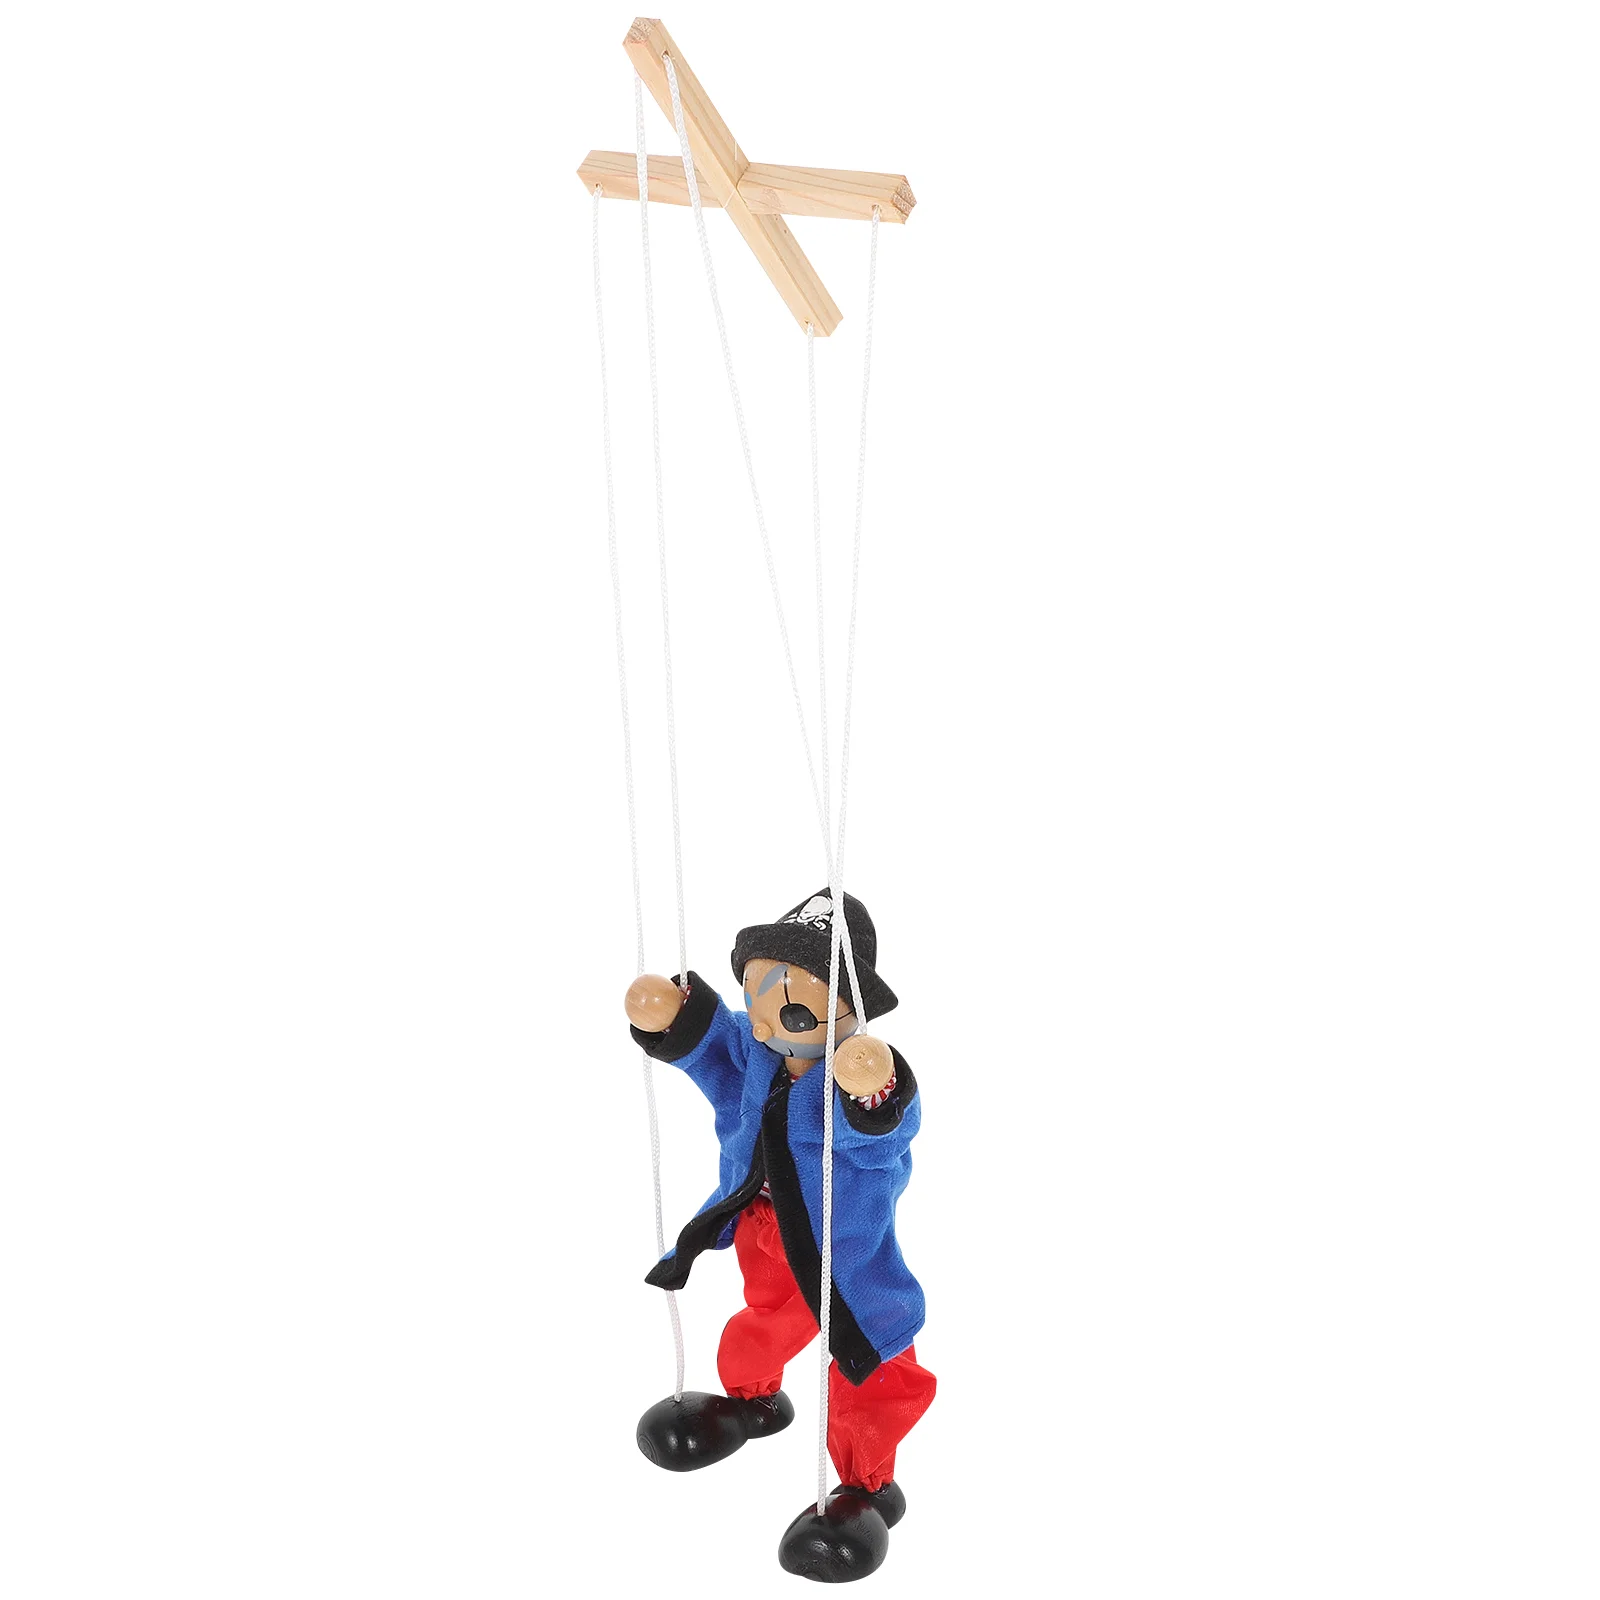 

Puppets Puppet Marionette String Wooden Pirate Toys Marionettes Clown Kids Adults Year Girls Old Funny Pull Toy Unique Hand